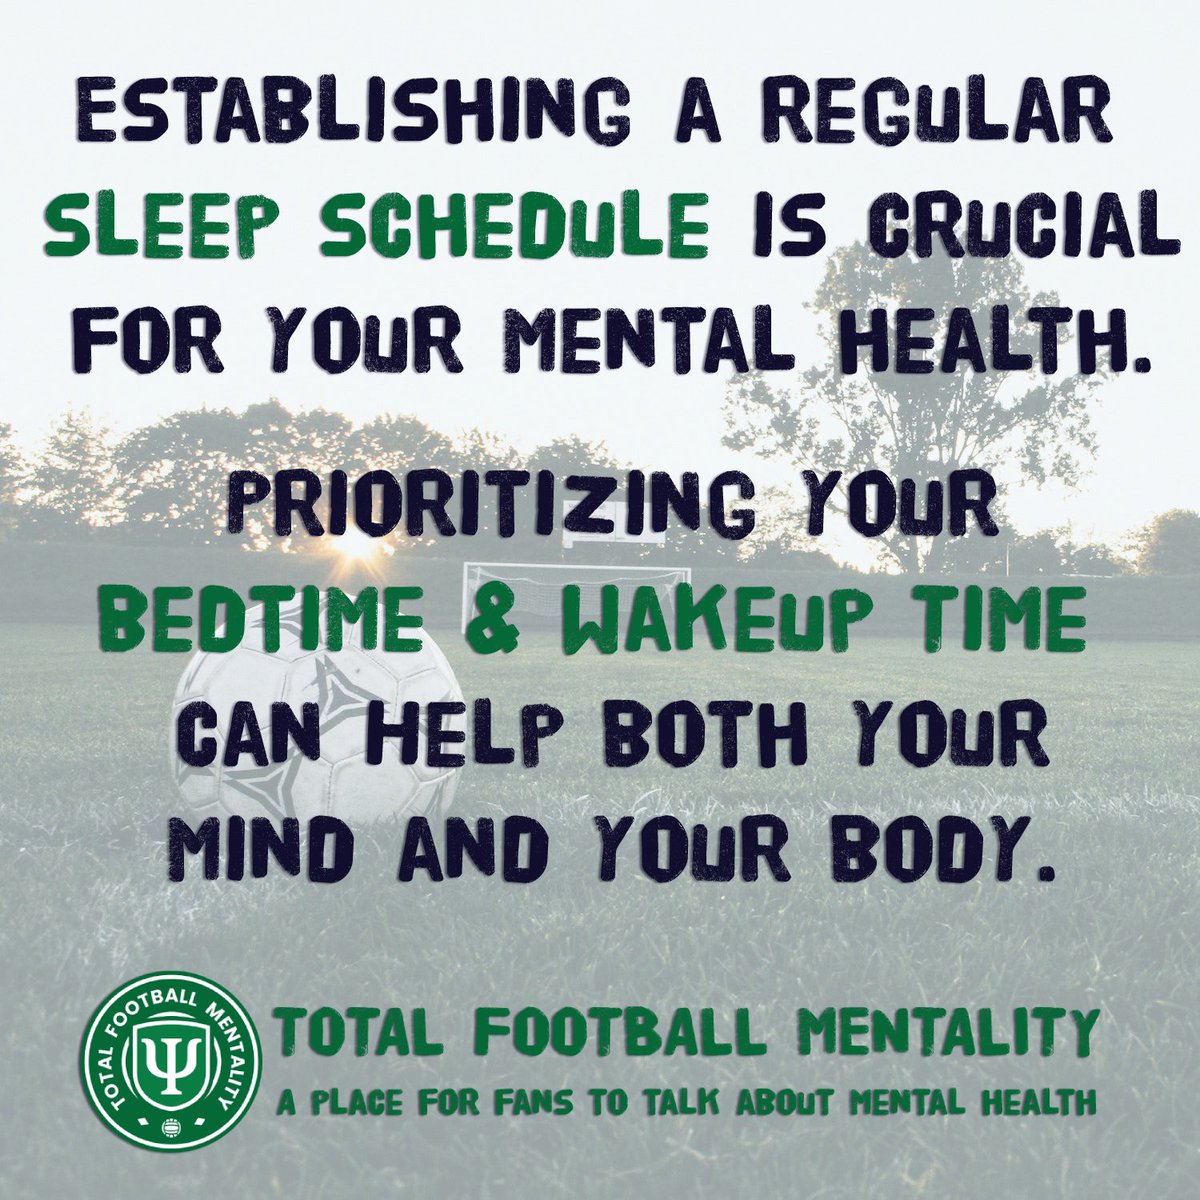 Going to bed and waking up at the same time every single day is one way to help establish a regular sleep schedule. When your sleep is regulated well, not only your physical health but also your mental health can improve. 

#MentalHealth 💚 #SleepSchedule 😴 #SleepRoutine